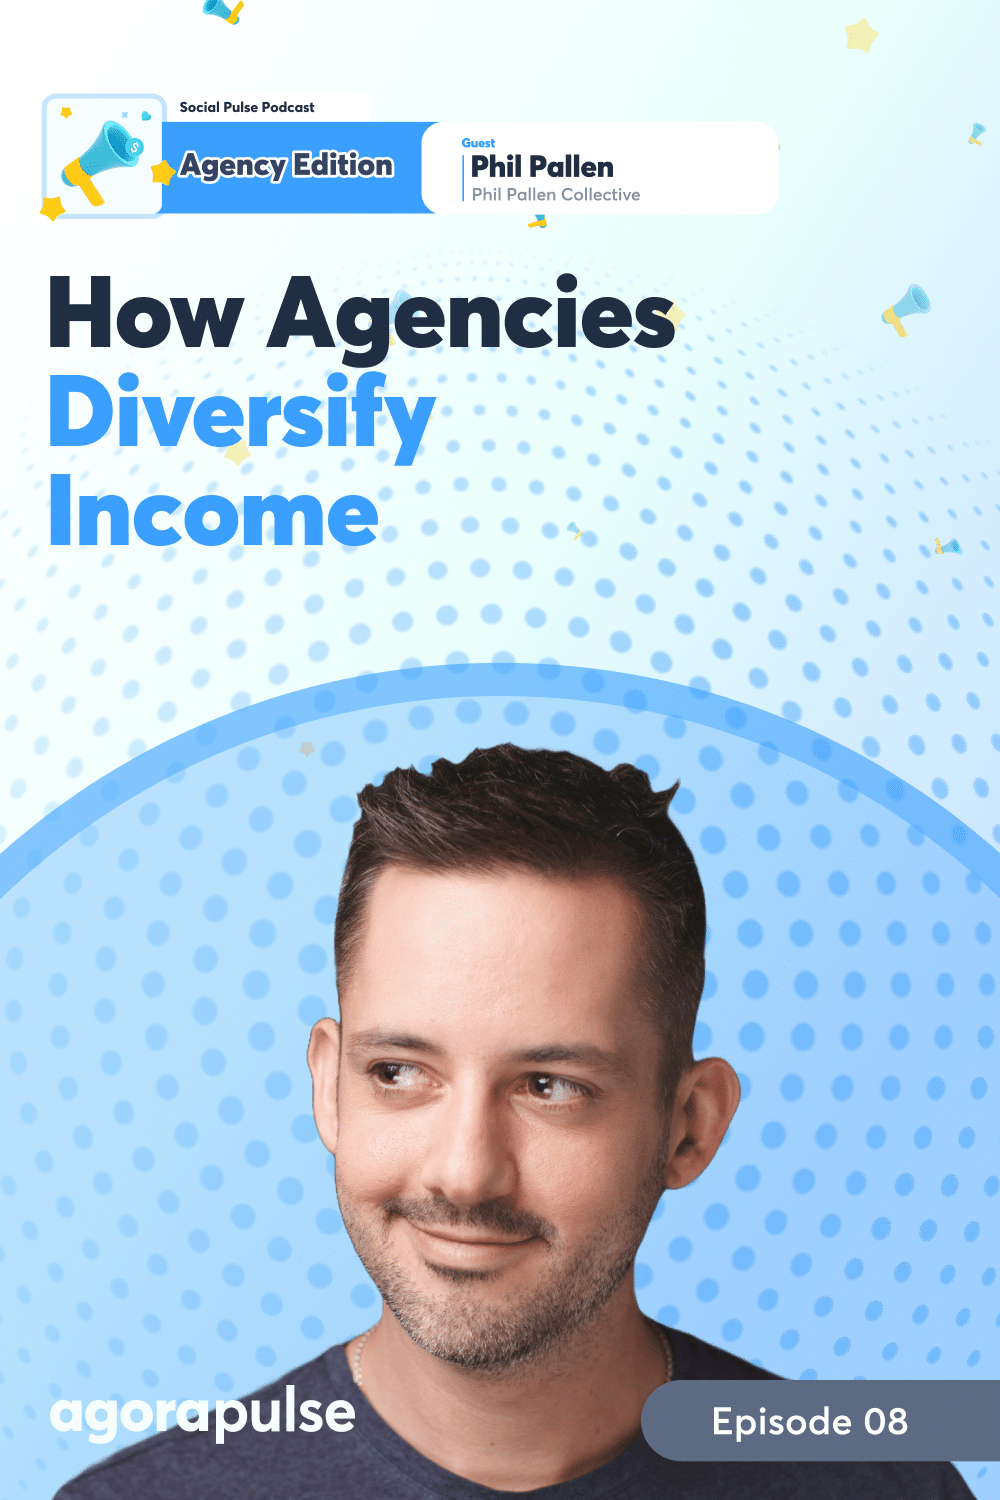 How Agencies Can Diversify Income and Avoid Cash Flow Issues